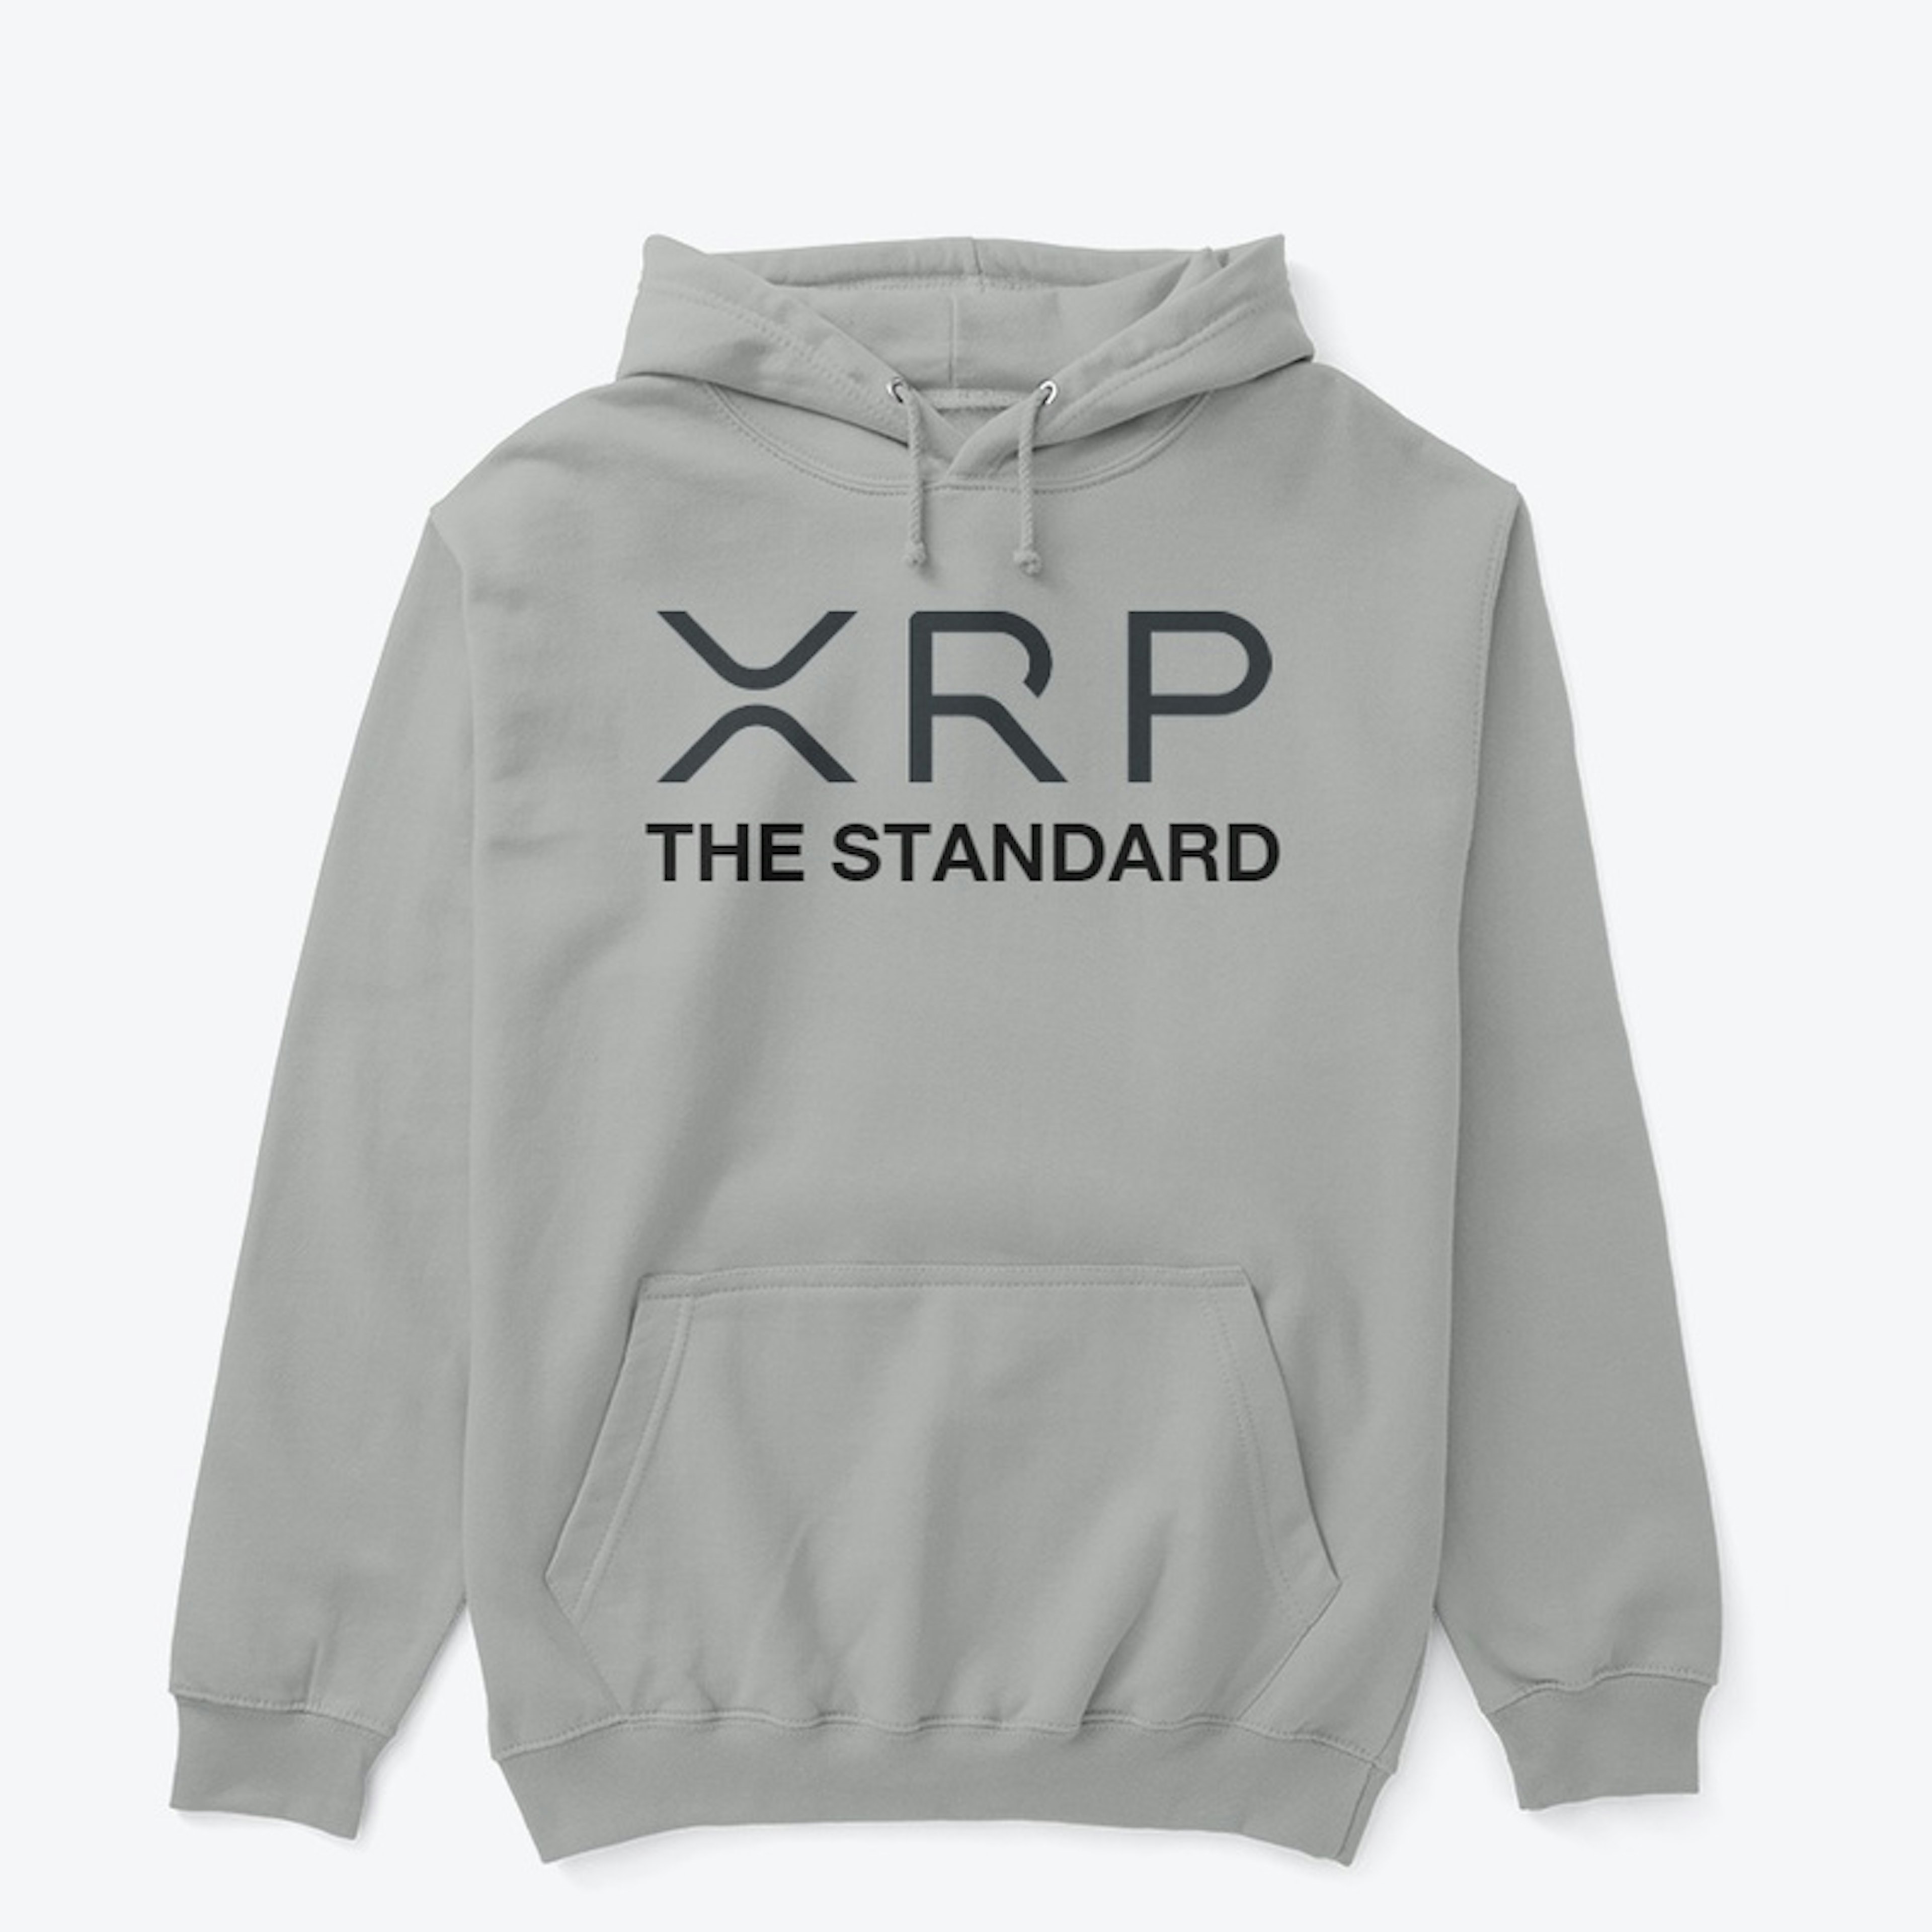 XRP - The Standard